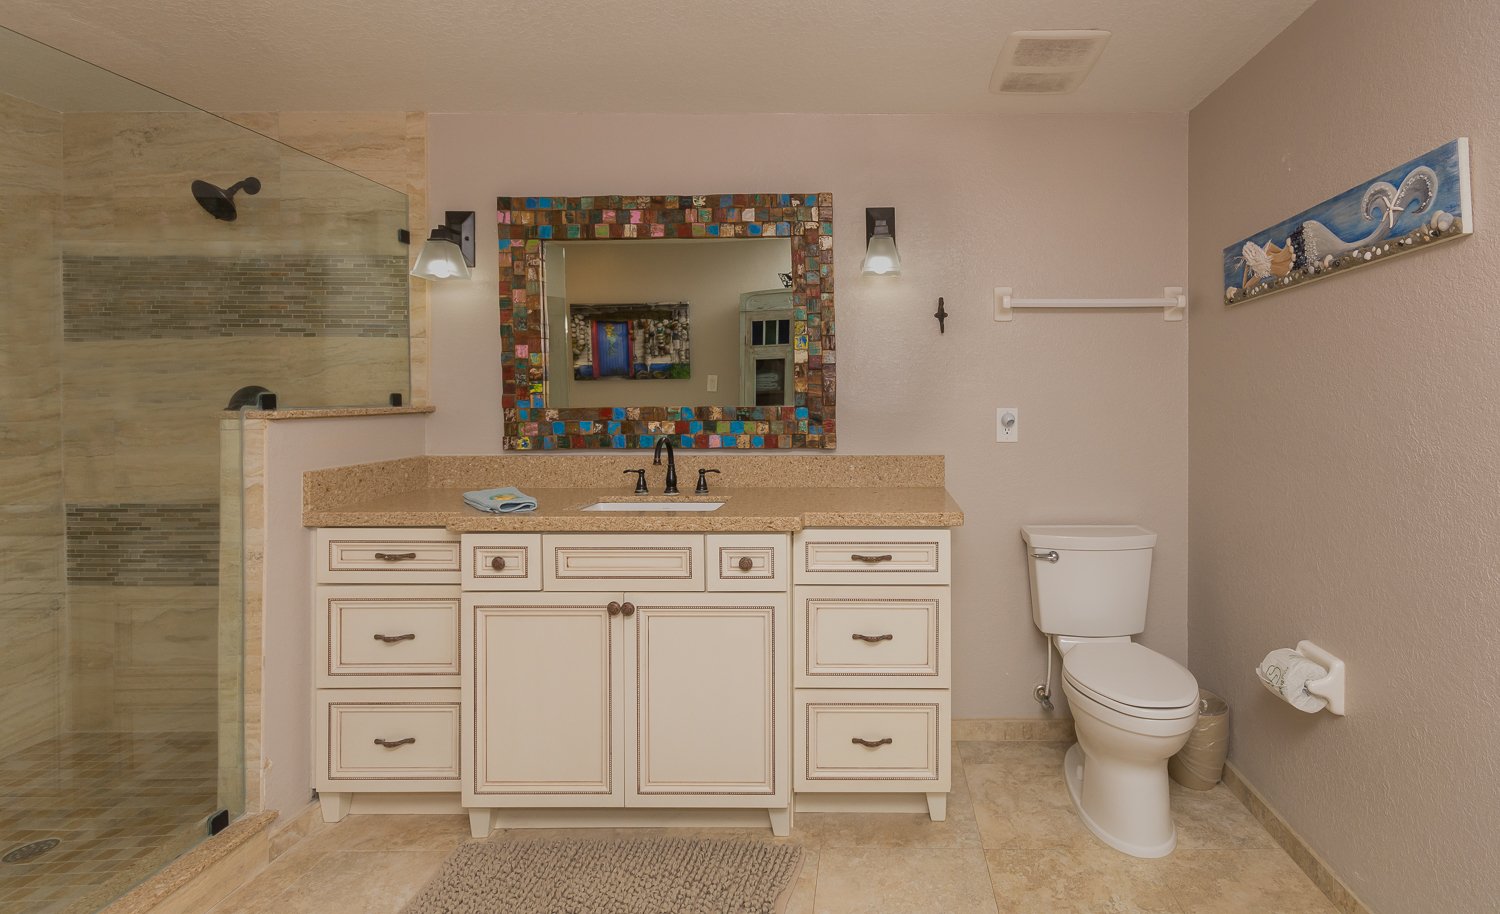 Bathroom with mirror and nearby toilet.